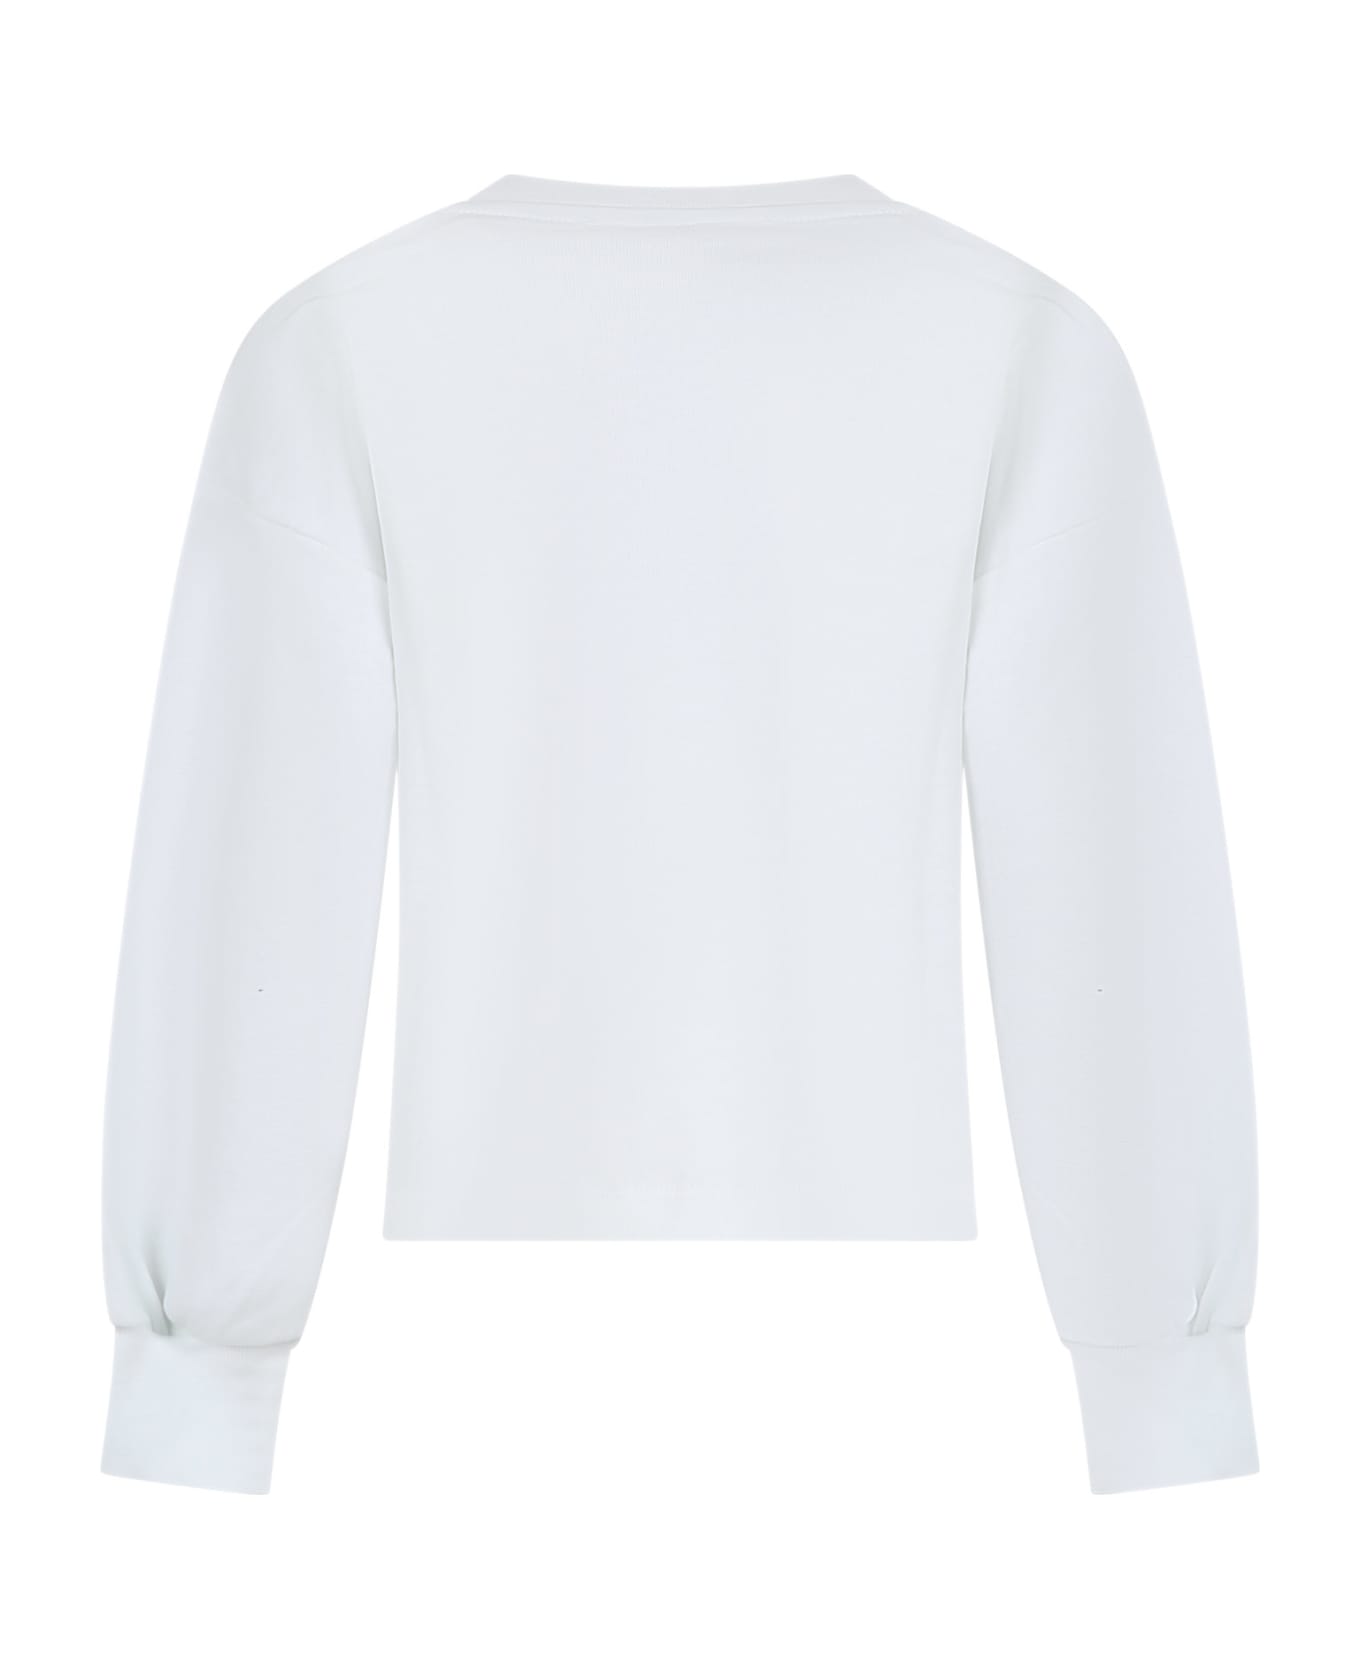 MSGM White Sweatshirt For Girl With Rhinestones And Multicolor Stones - White